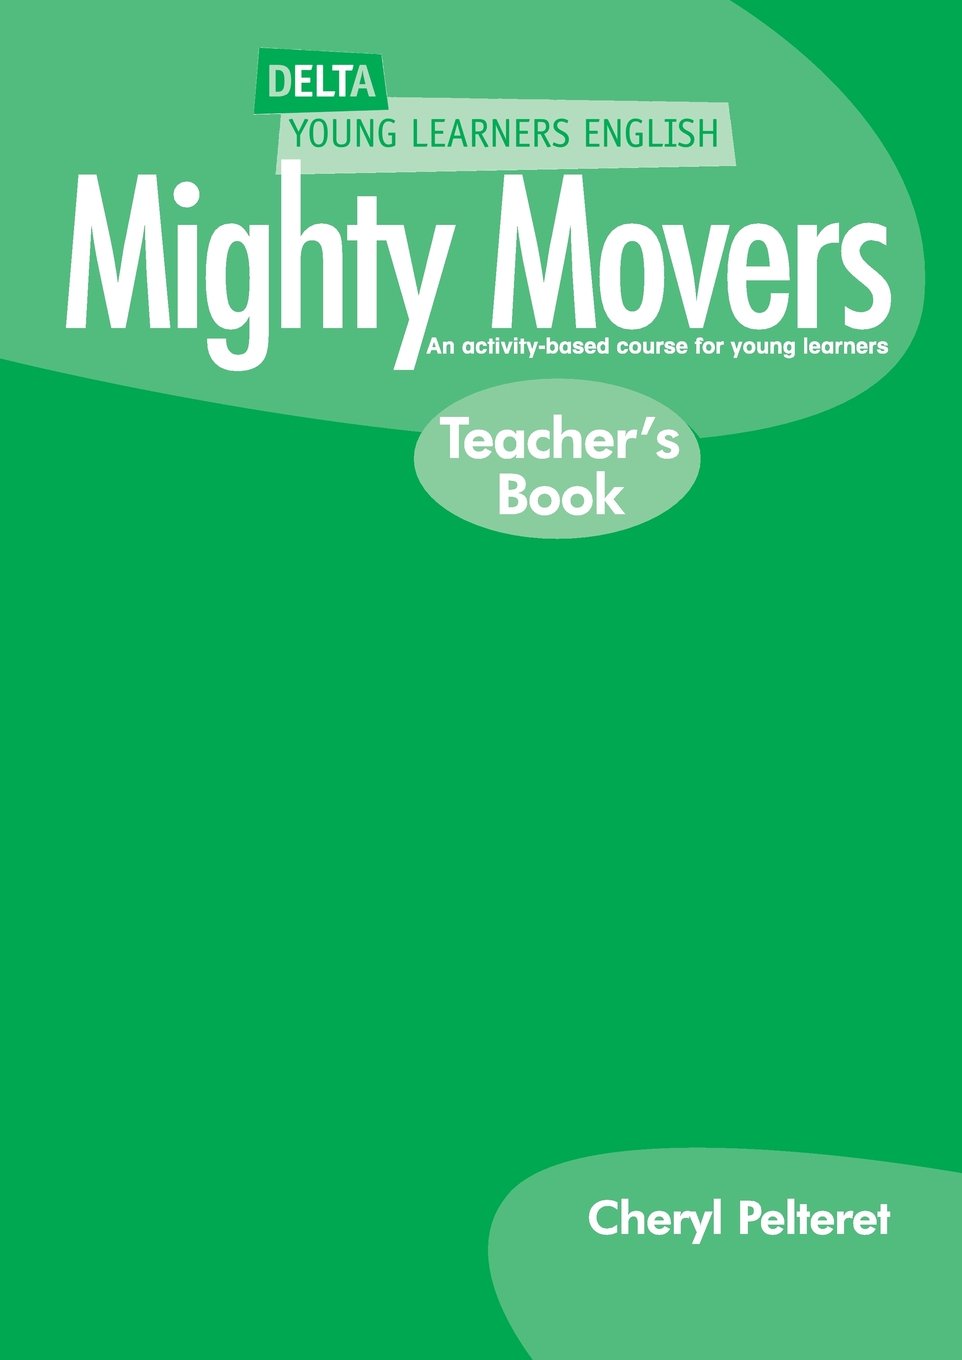 DELTA MIGHTY MOVERS Teacher's Book